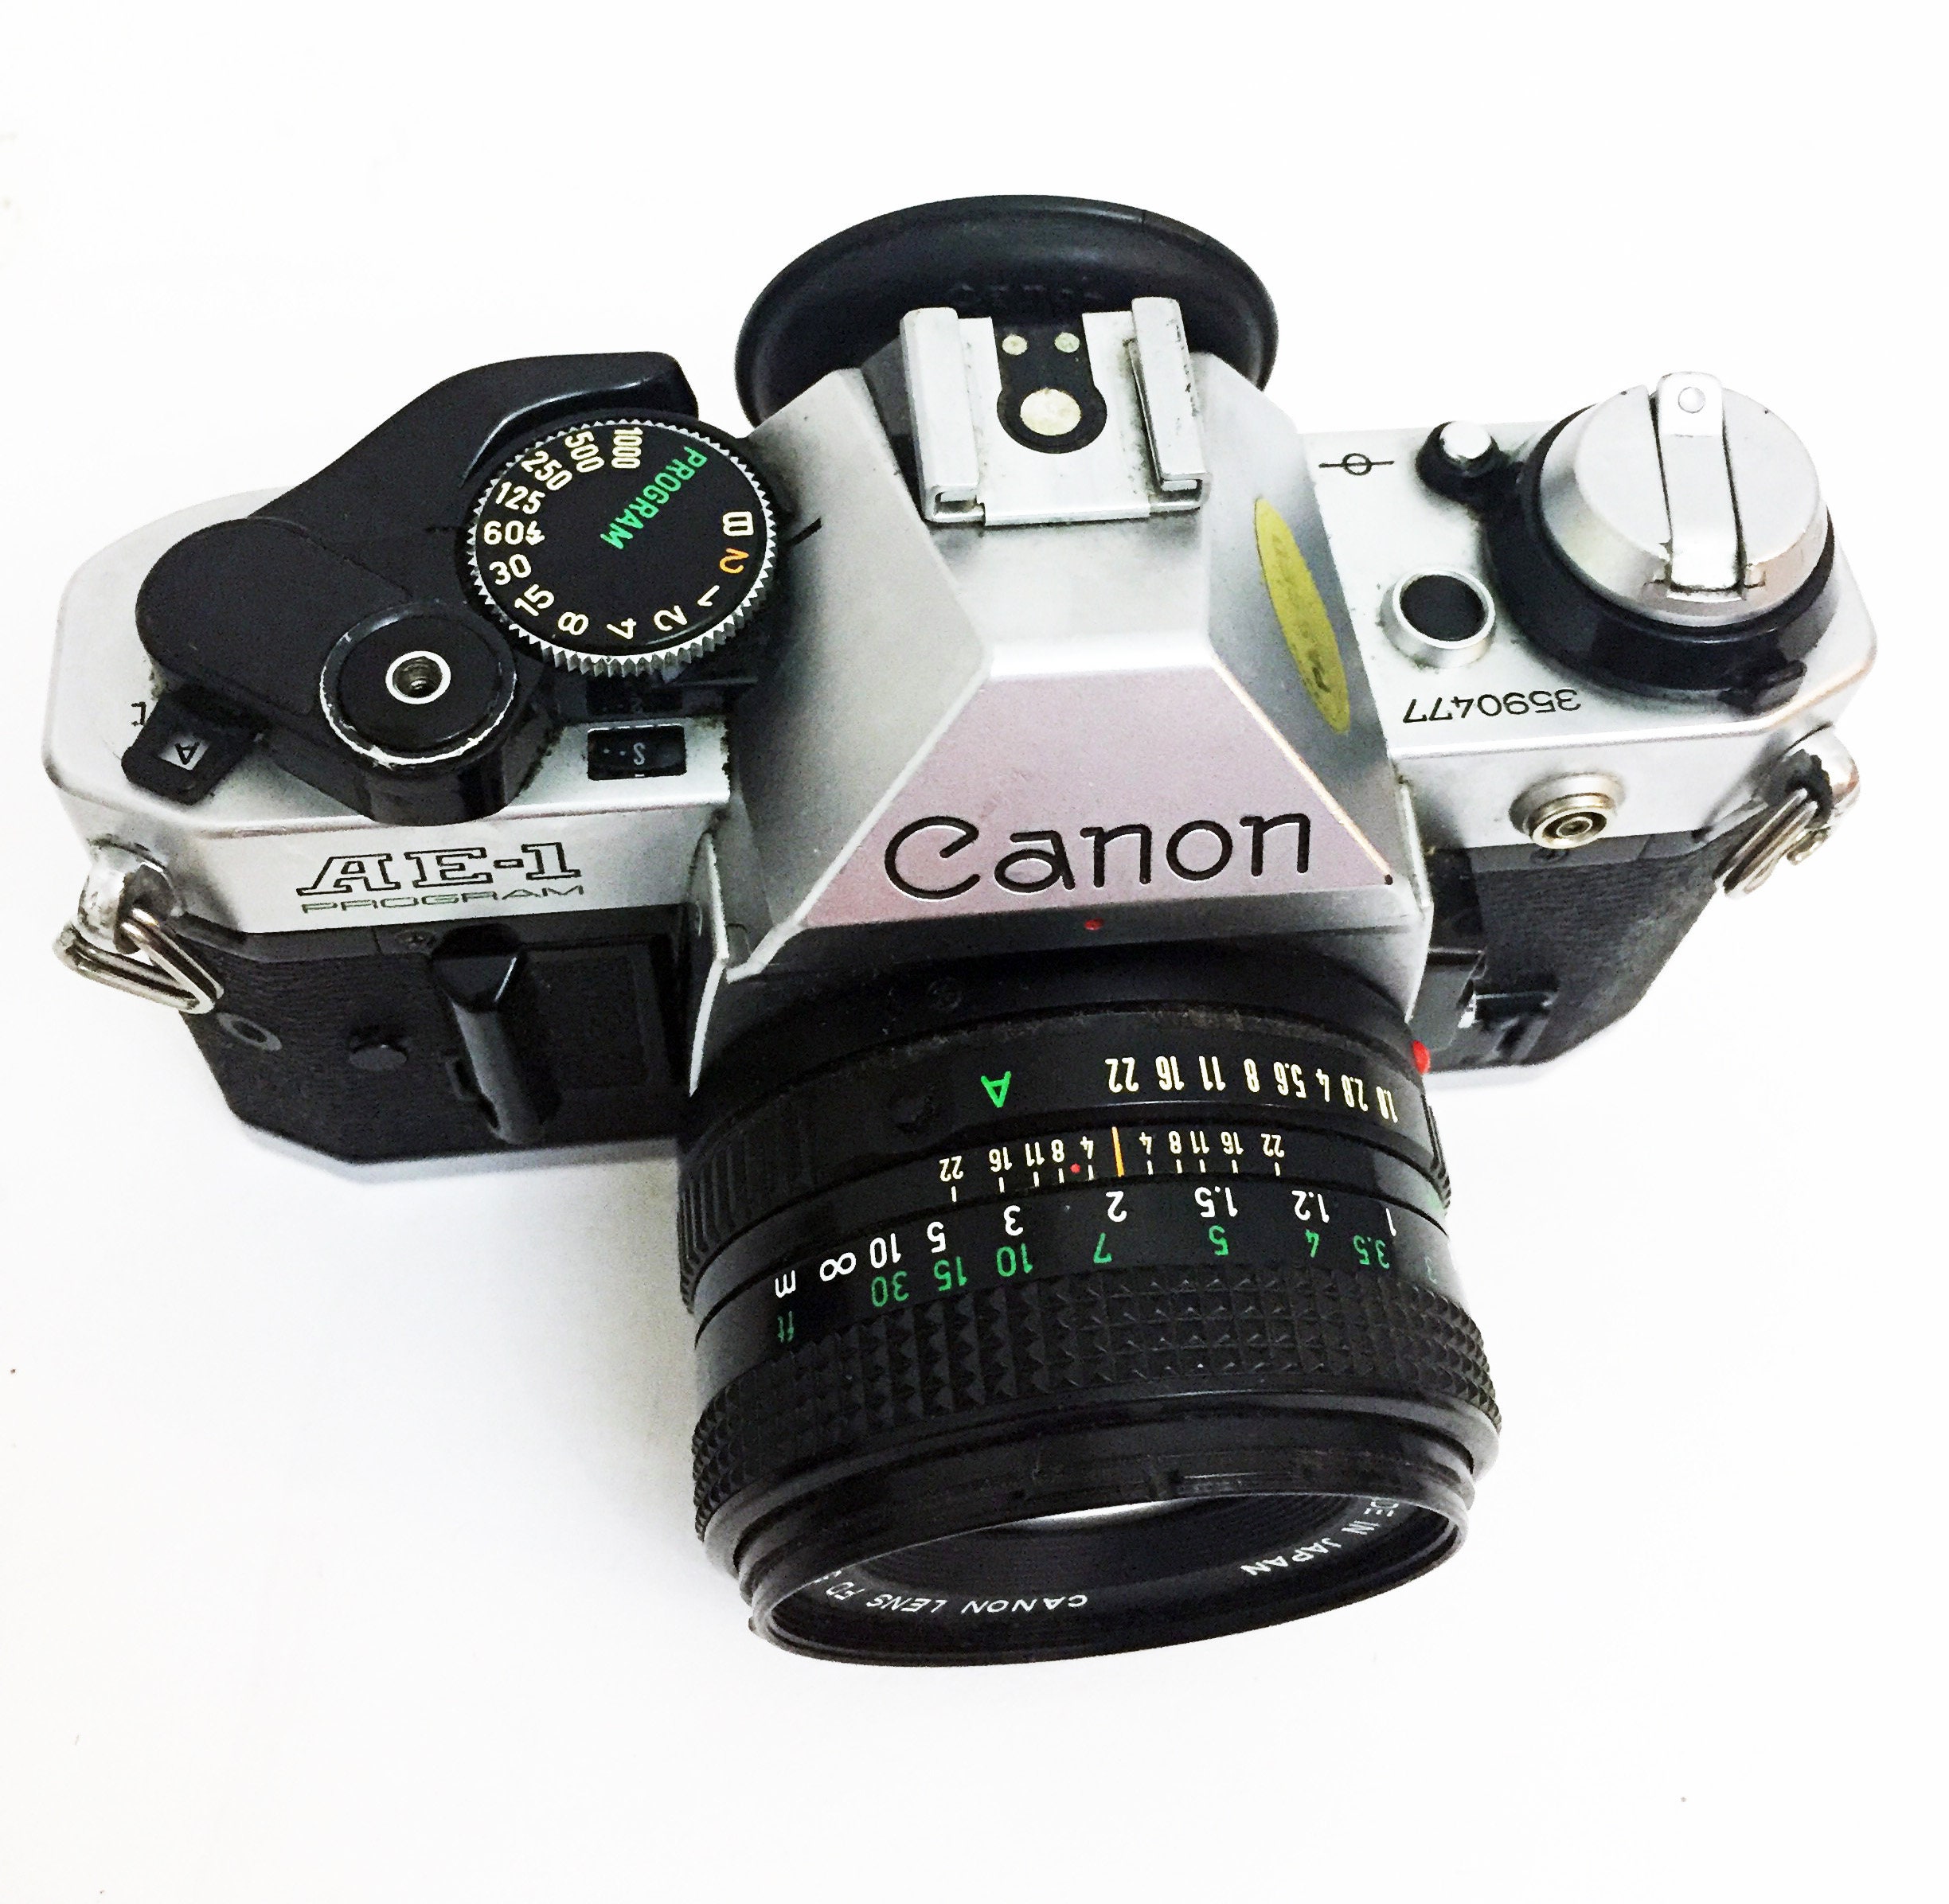 For Canon AE-1 Program tested AE-1 Canon FD 50mm F1.8 manual lens working in excellent condition